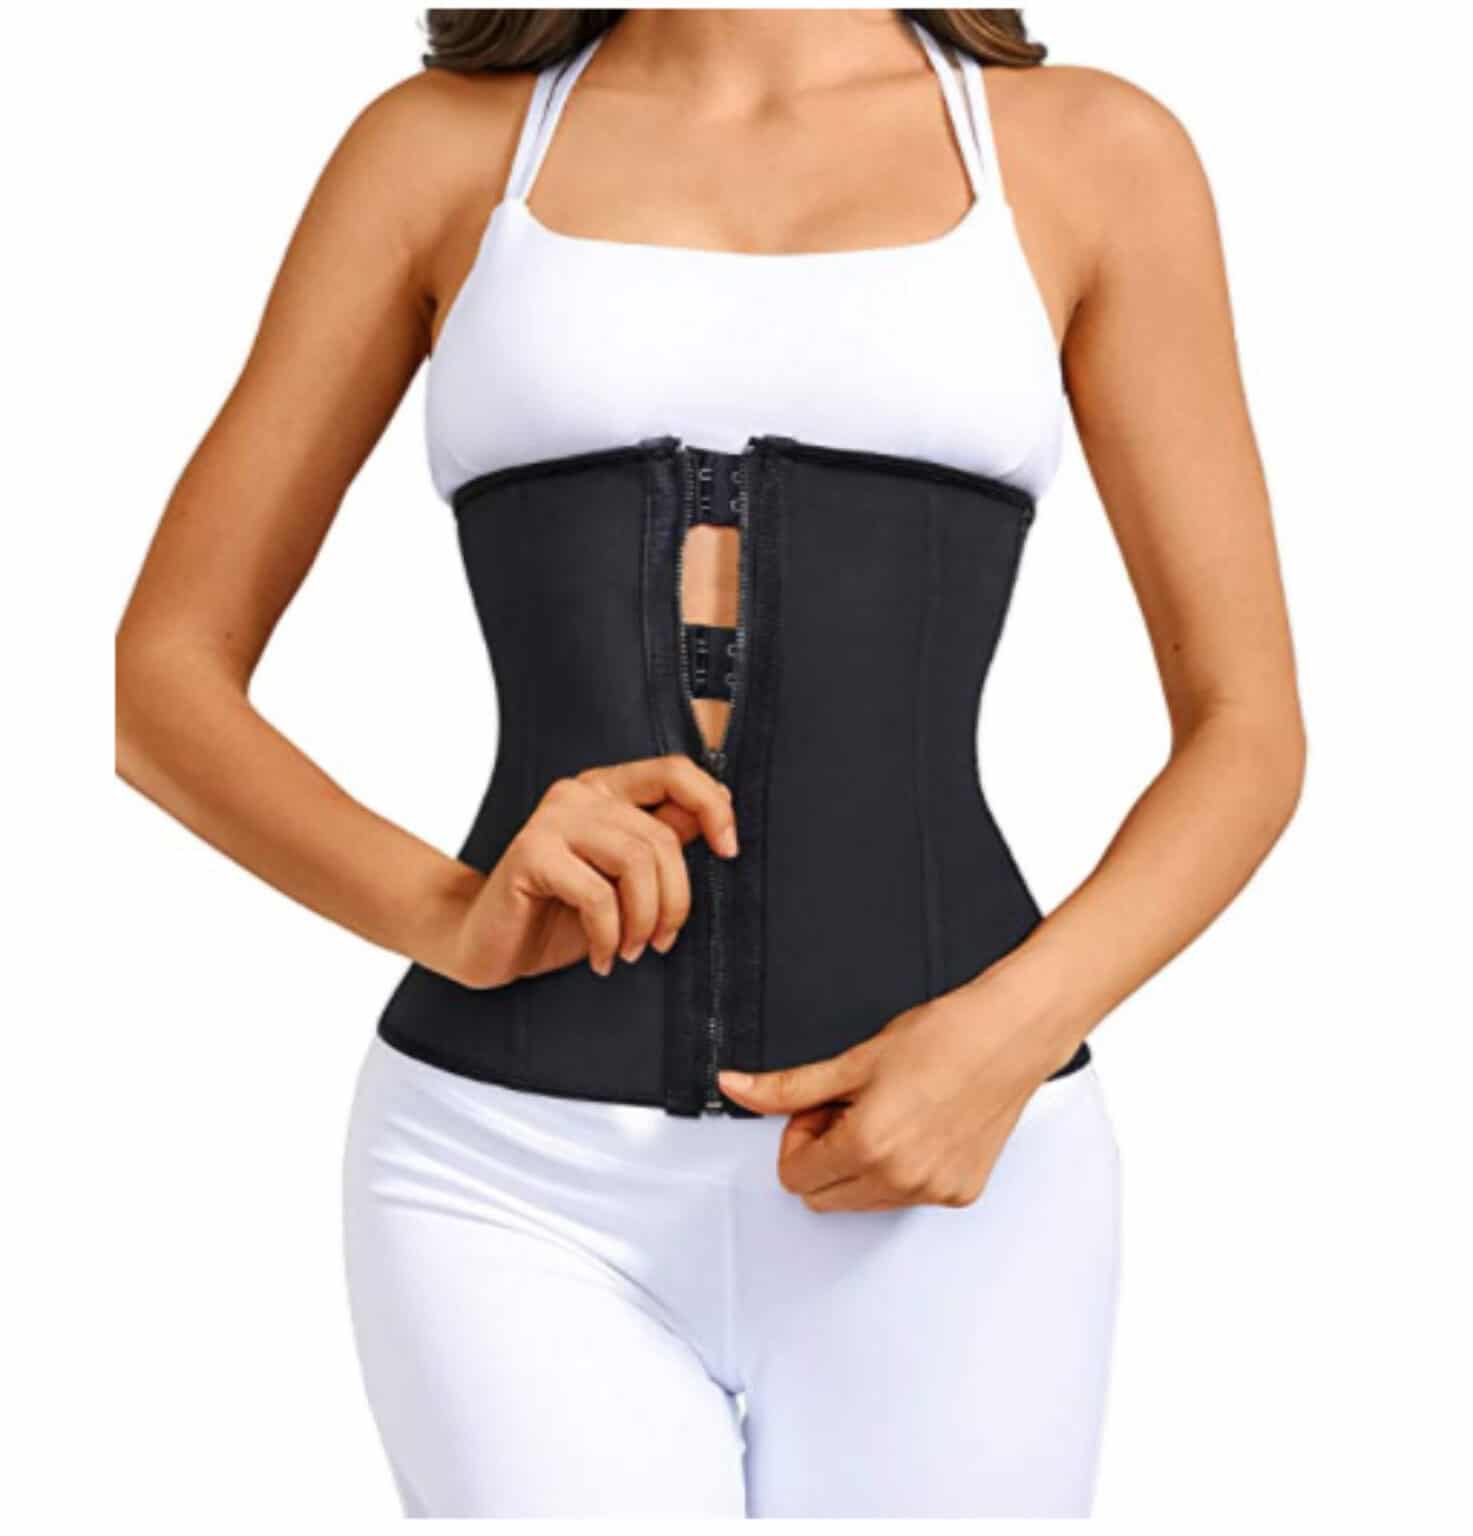 Where to Buy Waist Trainer UK For Weight Loss and Much More - Discount Age